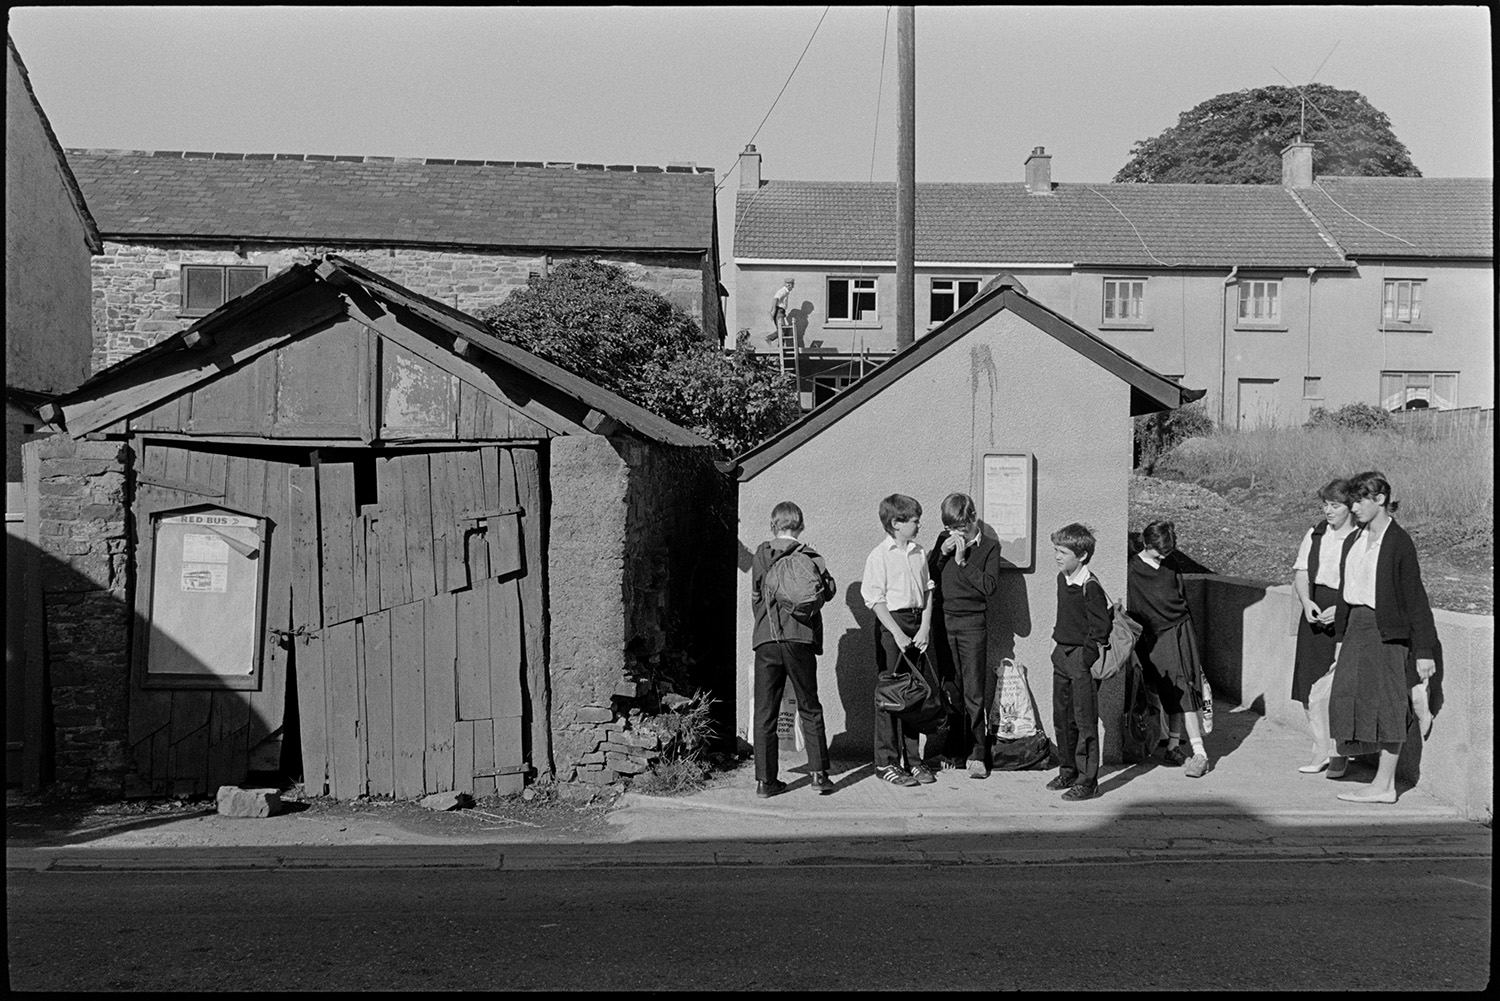 School children waiting for bus in village street beside old shed, garage.
[Seven children waiting for a bus, standing by the bus shelter in Beaford. Houses and gardens are visible in the background. A man working on top of the porch of one of the houses is also visible. Next to the bus shelter is a garage with an old wooden door on which is fixed a Red Bus noticeboard.]